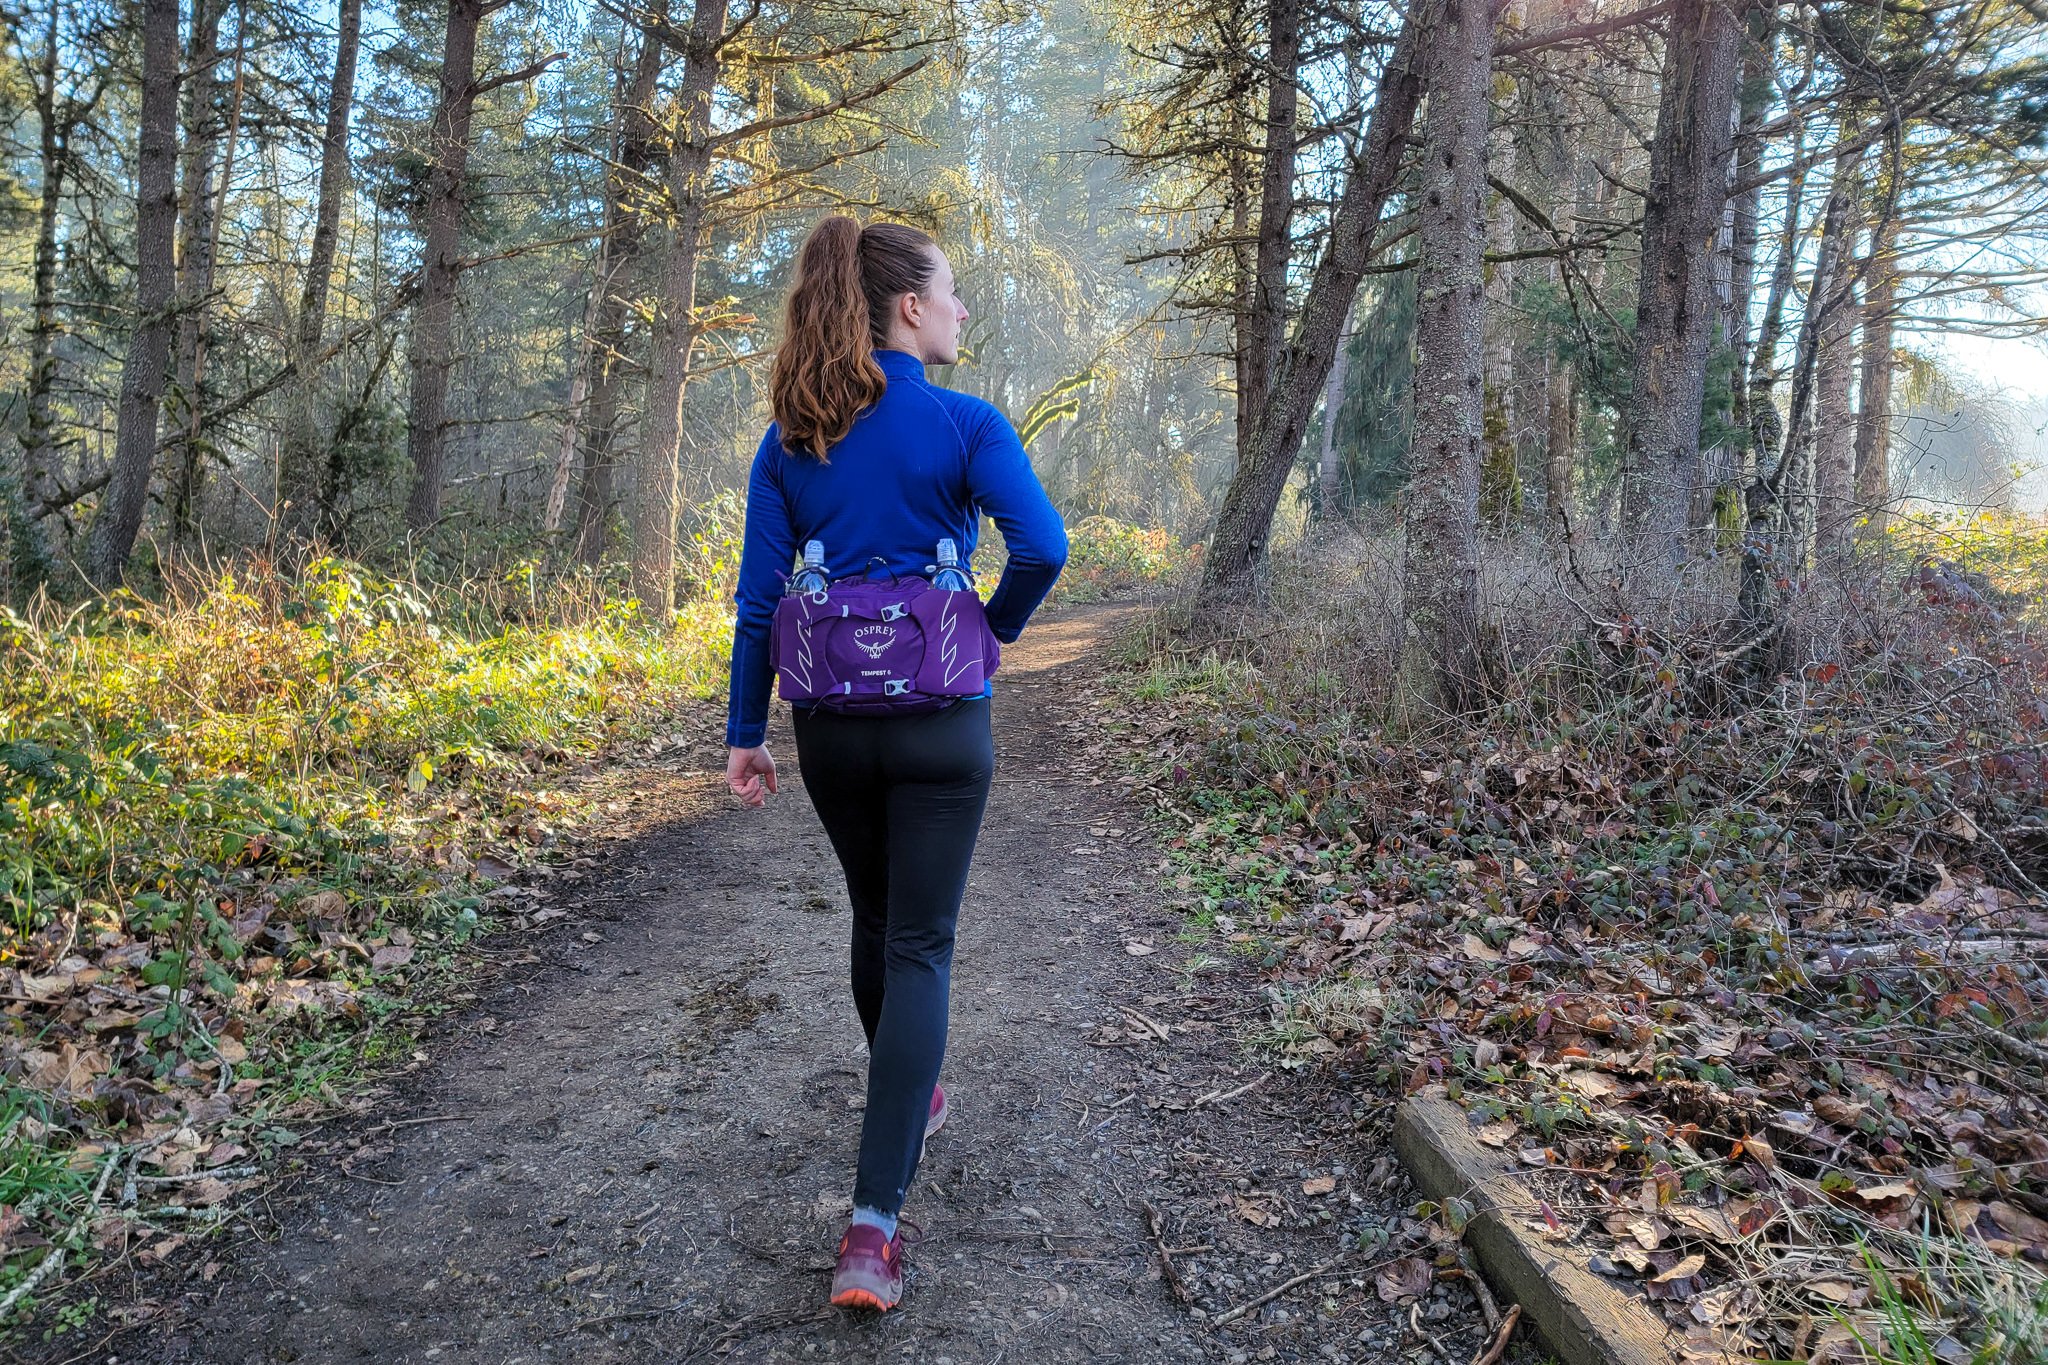 A hiker wearing the Osprey Tempest Waist pack on a foggy wooded trail